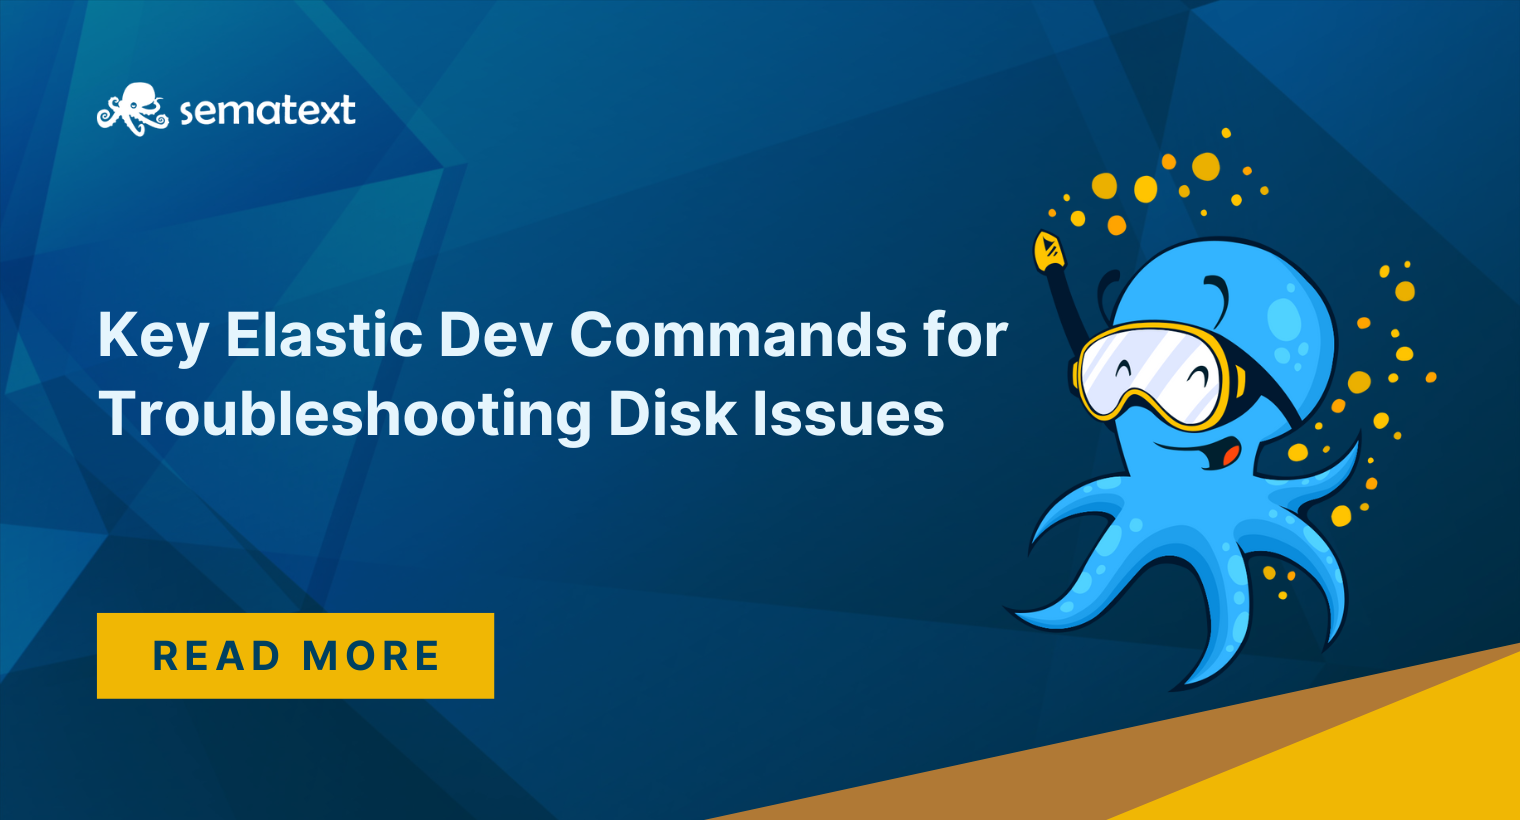 Key Elastic Dev Commands for Troubleshooting Disk Issues